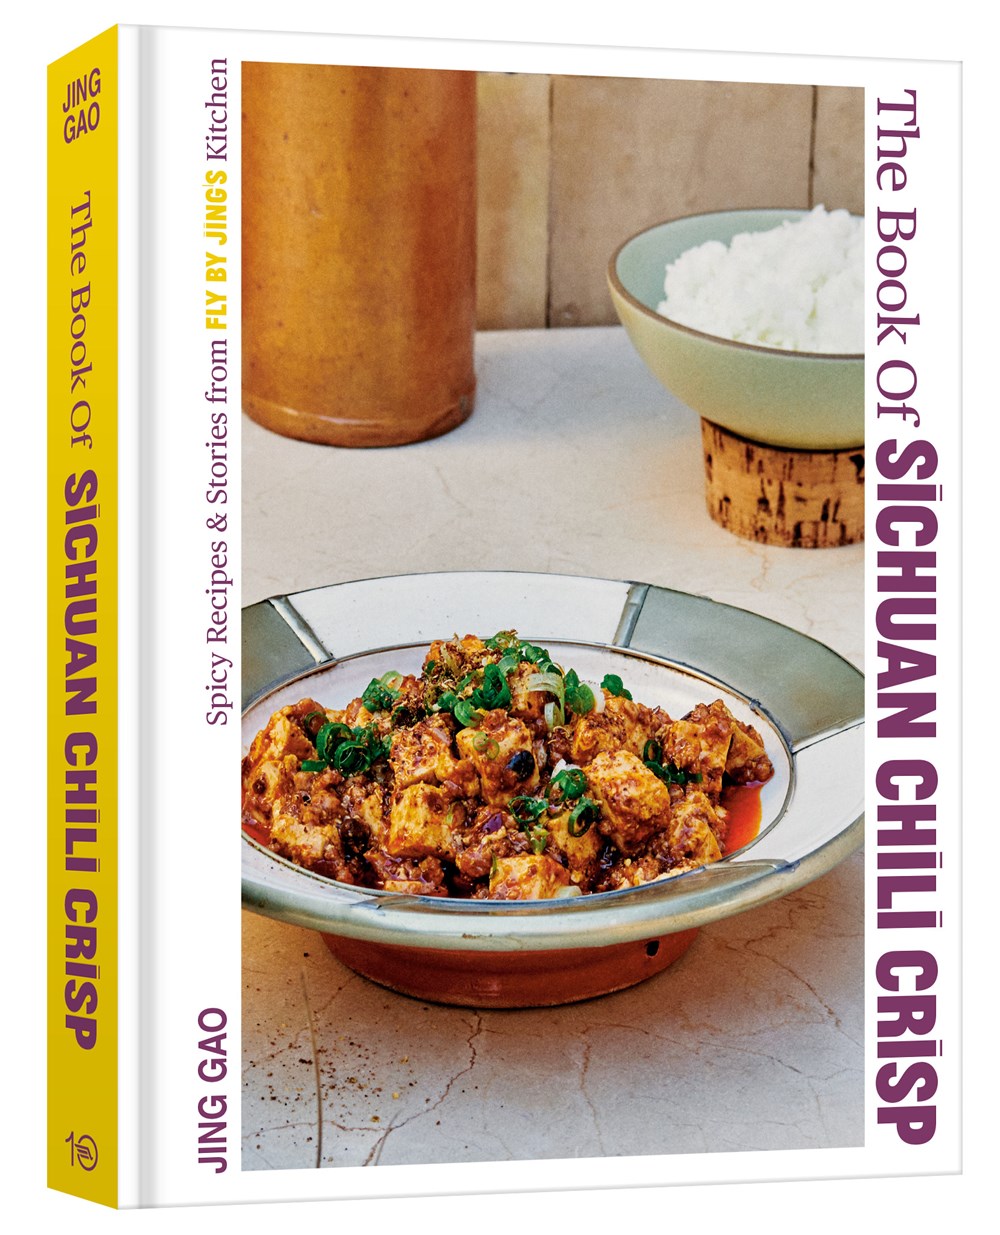 The Book of Sichuan Chili Crisp: Spicy Recipes and Stories from Fly By Jing's Kitchen by Jing Gao (9/26/23)